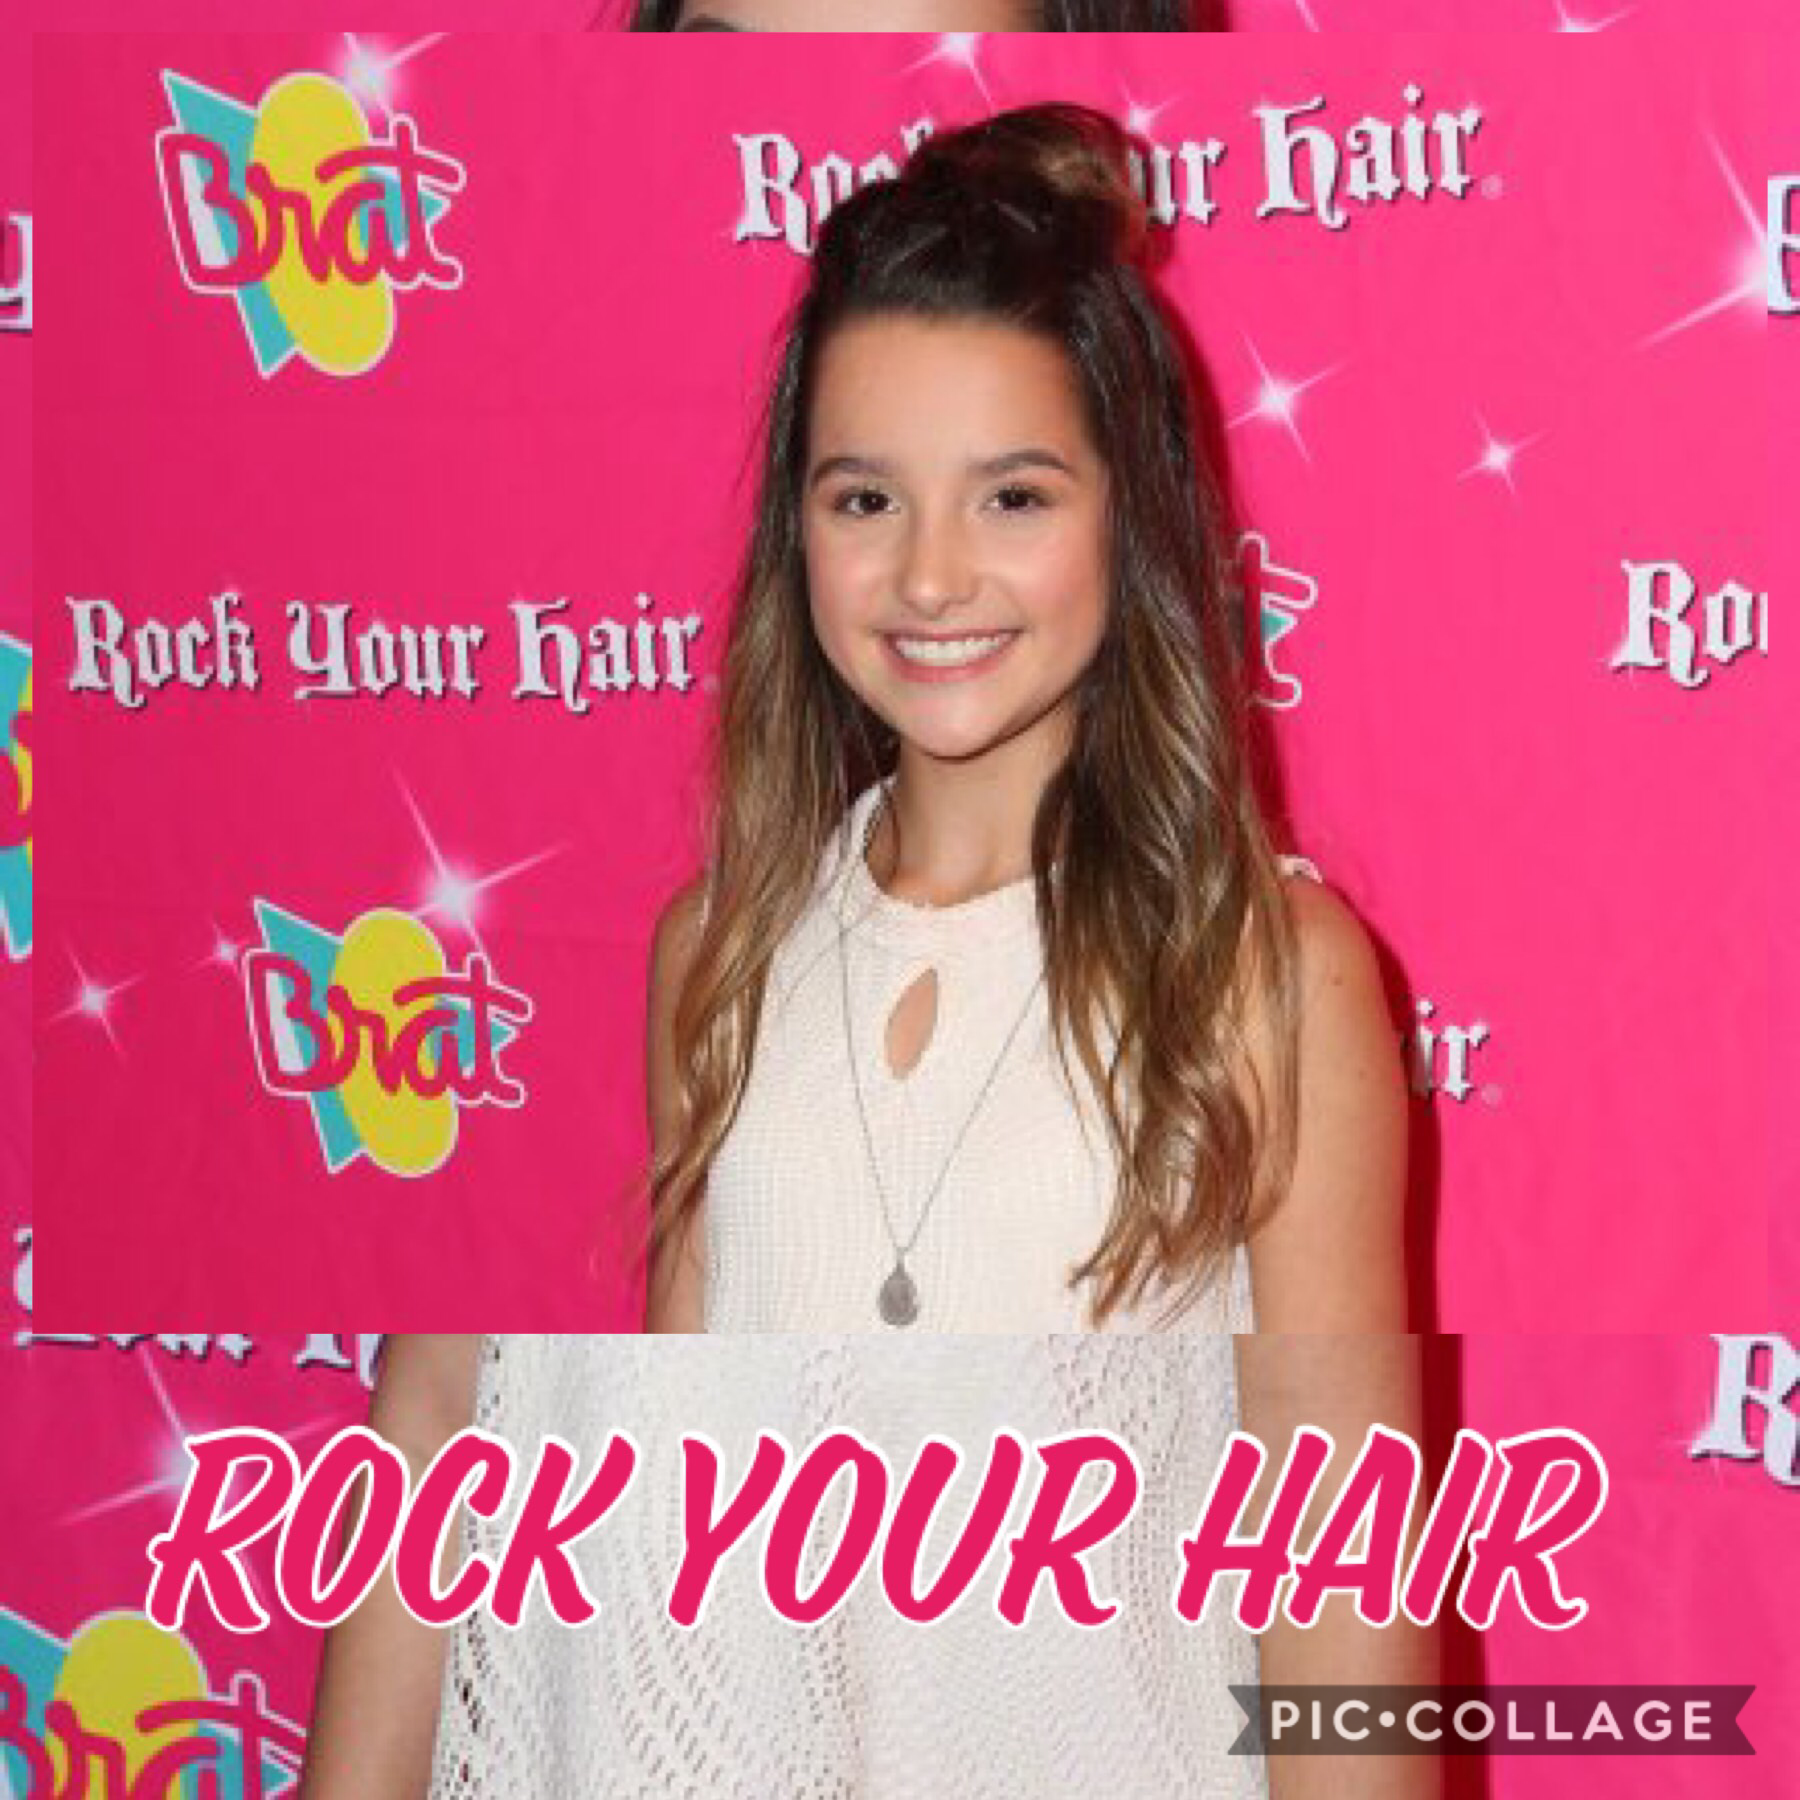 Rock your hair